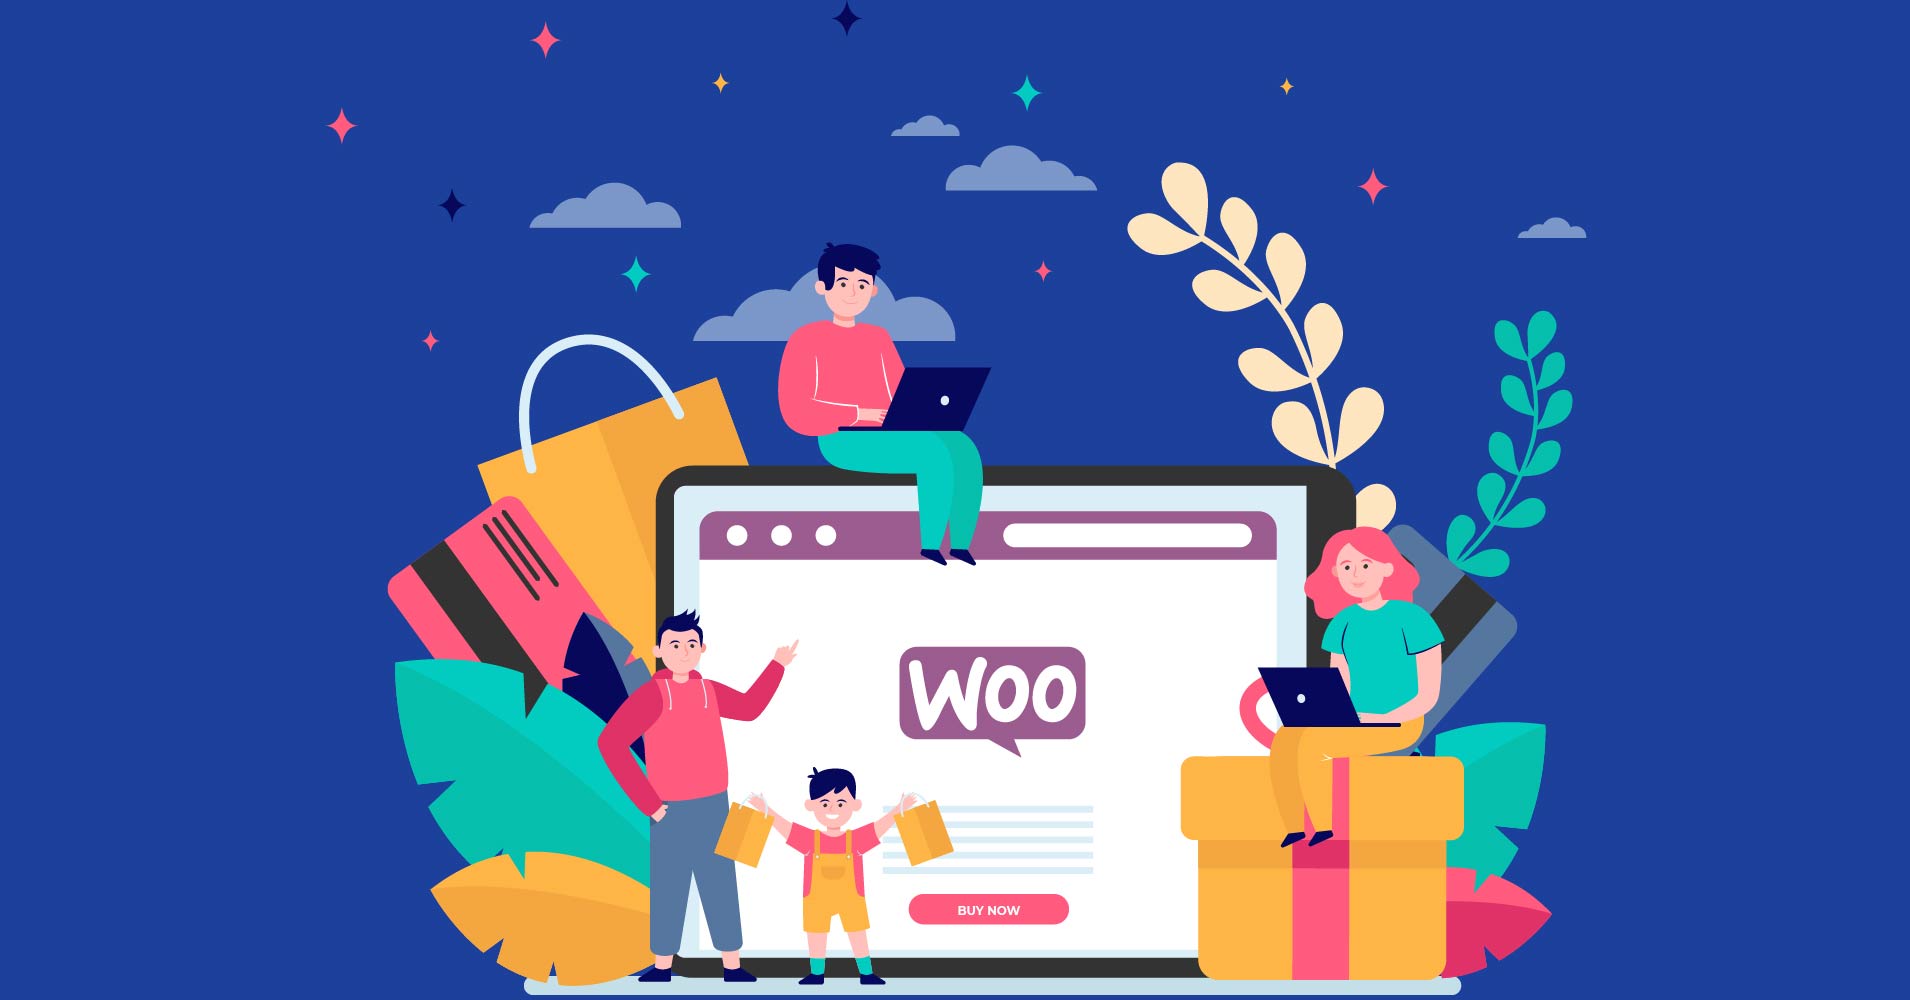 Set up a WooCommerce store from scratch